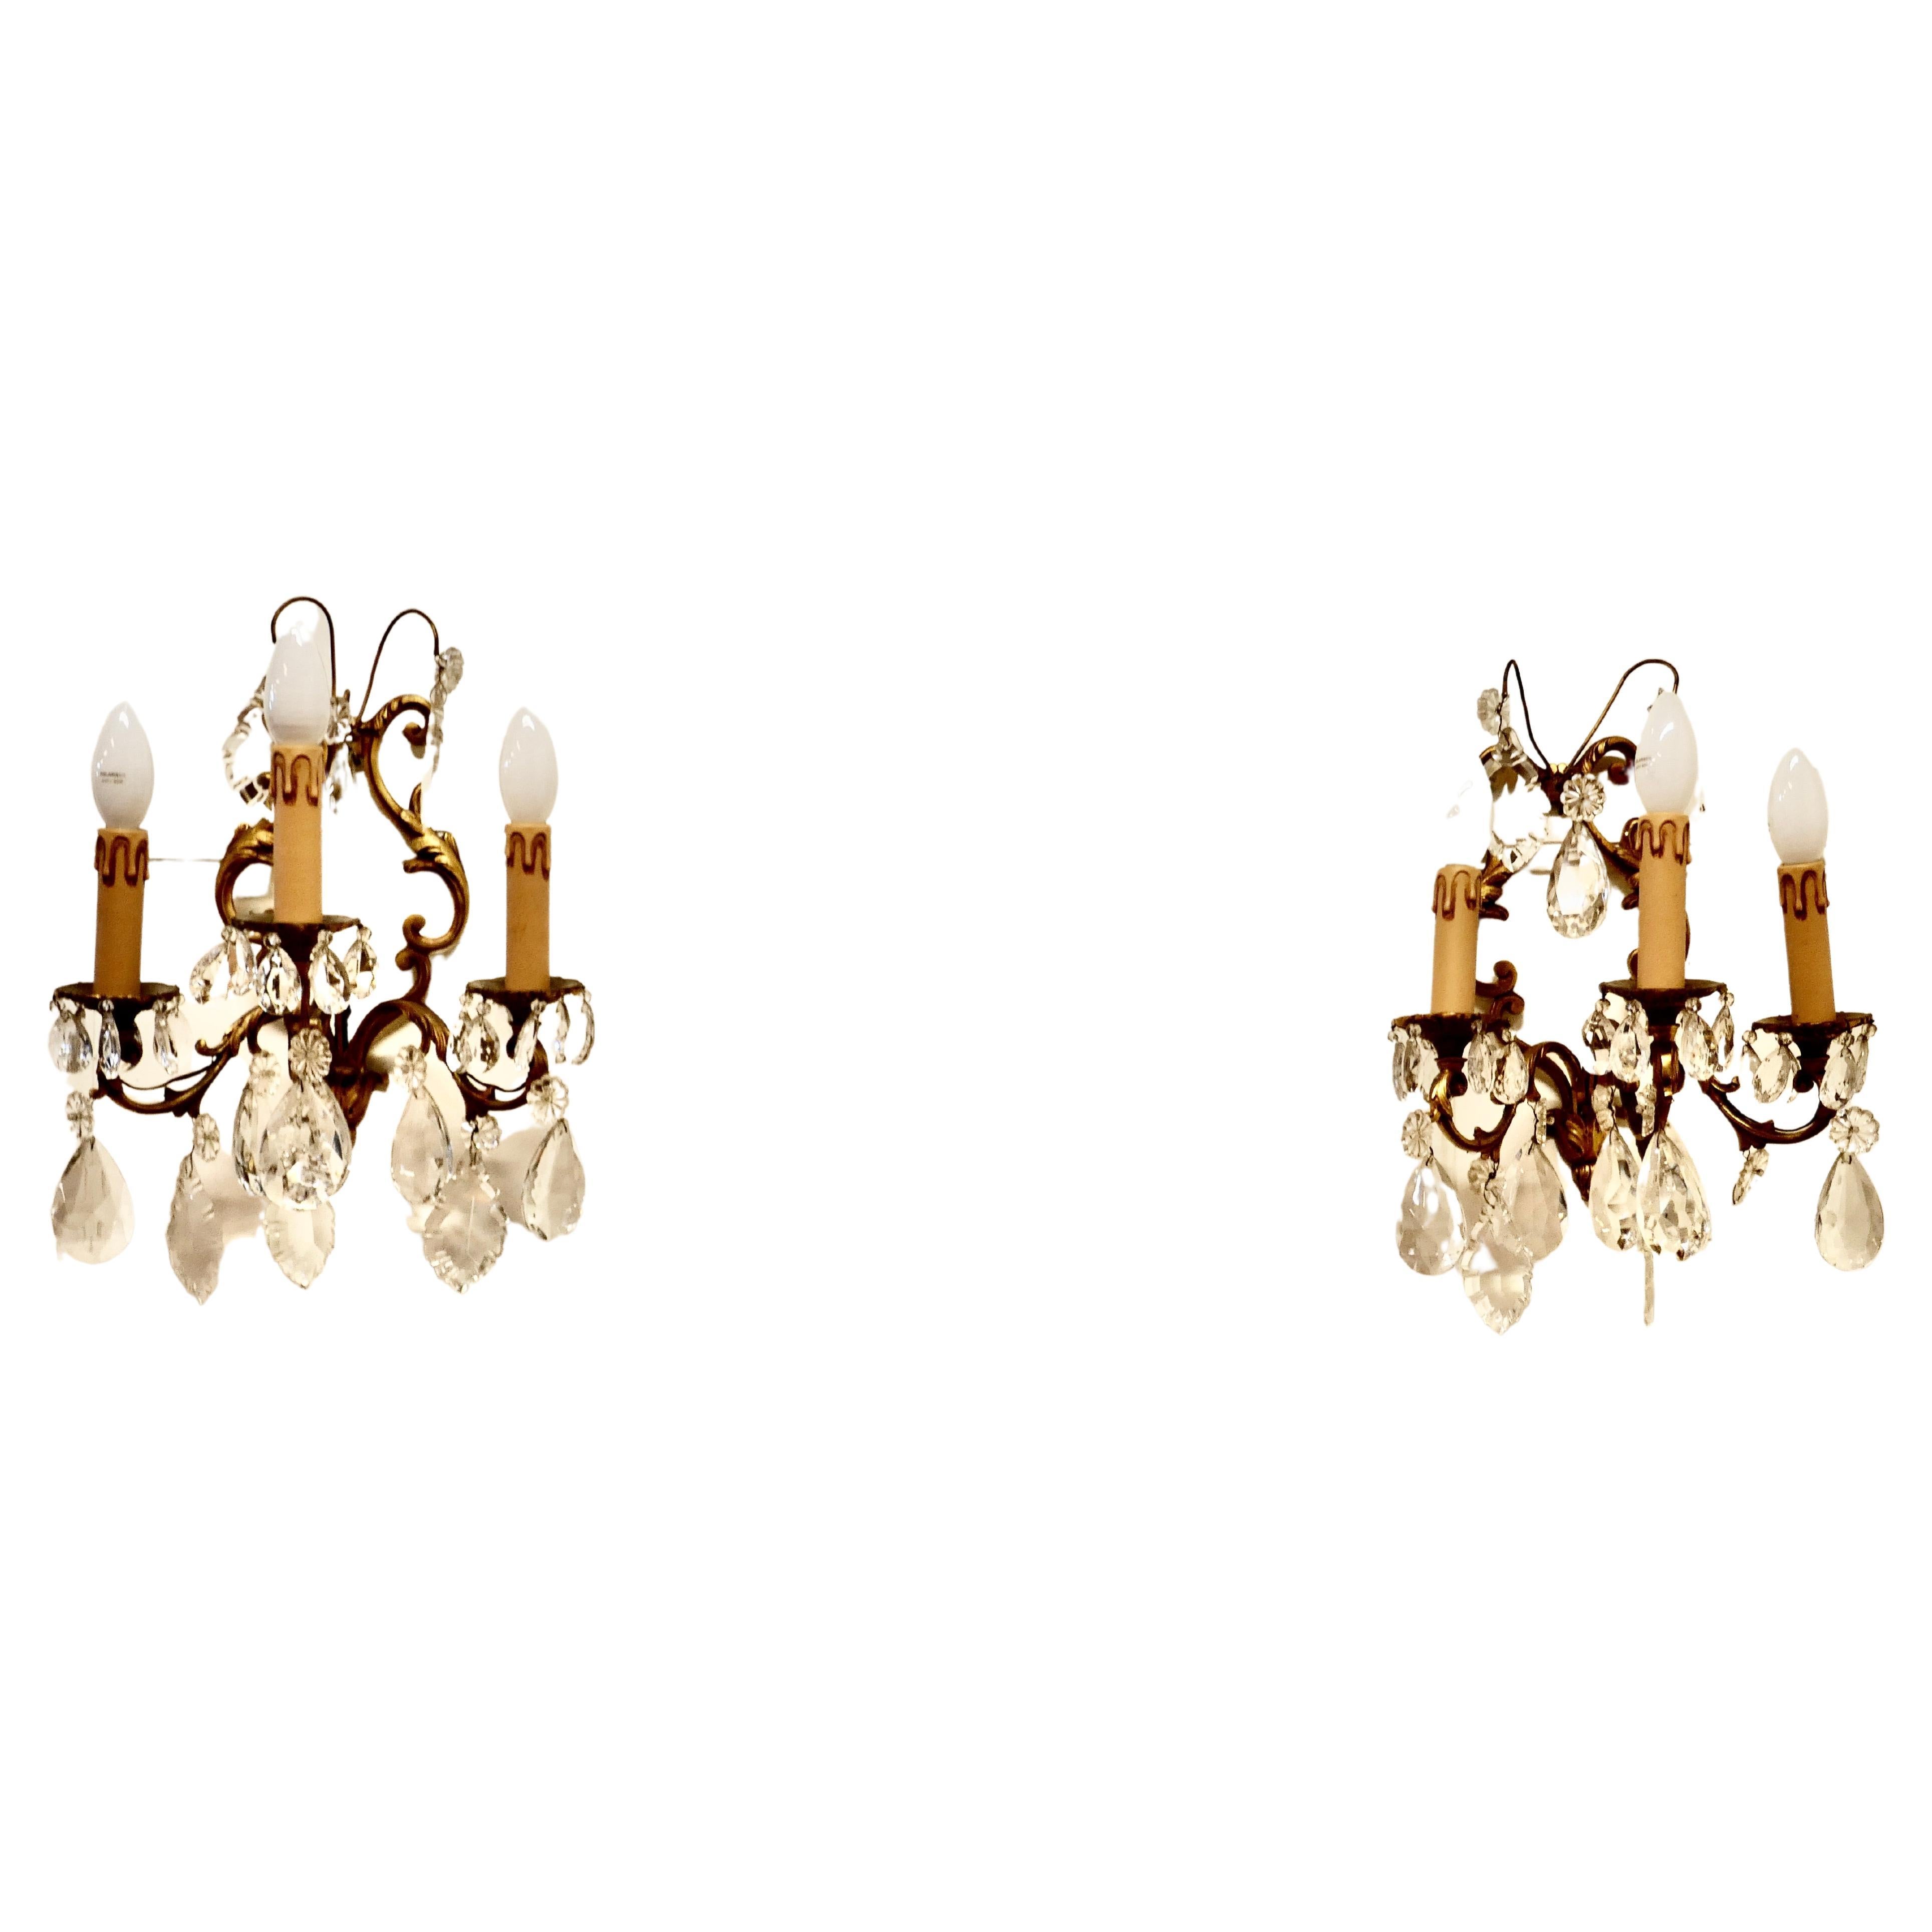 Pair of French Triple Wall Light Chandeliers For Sale